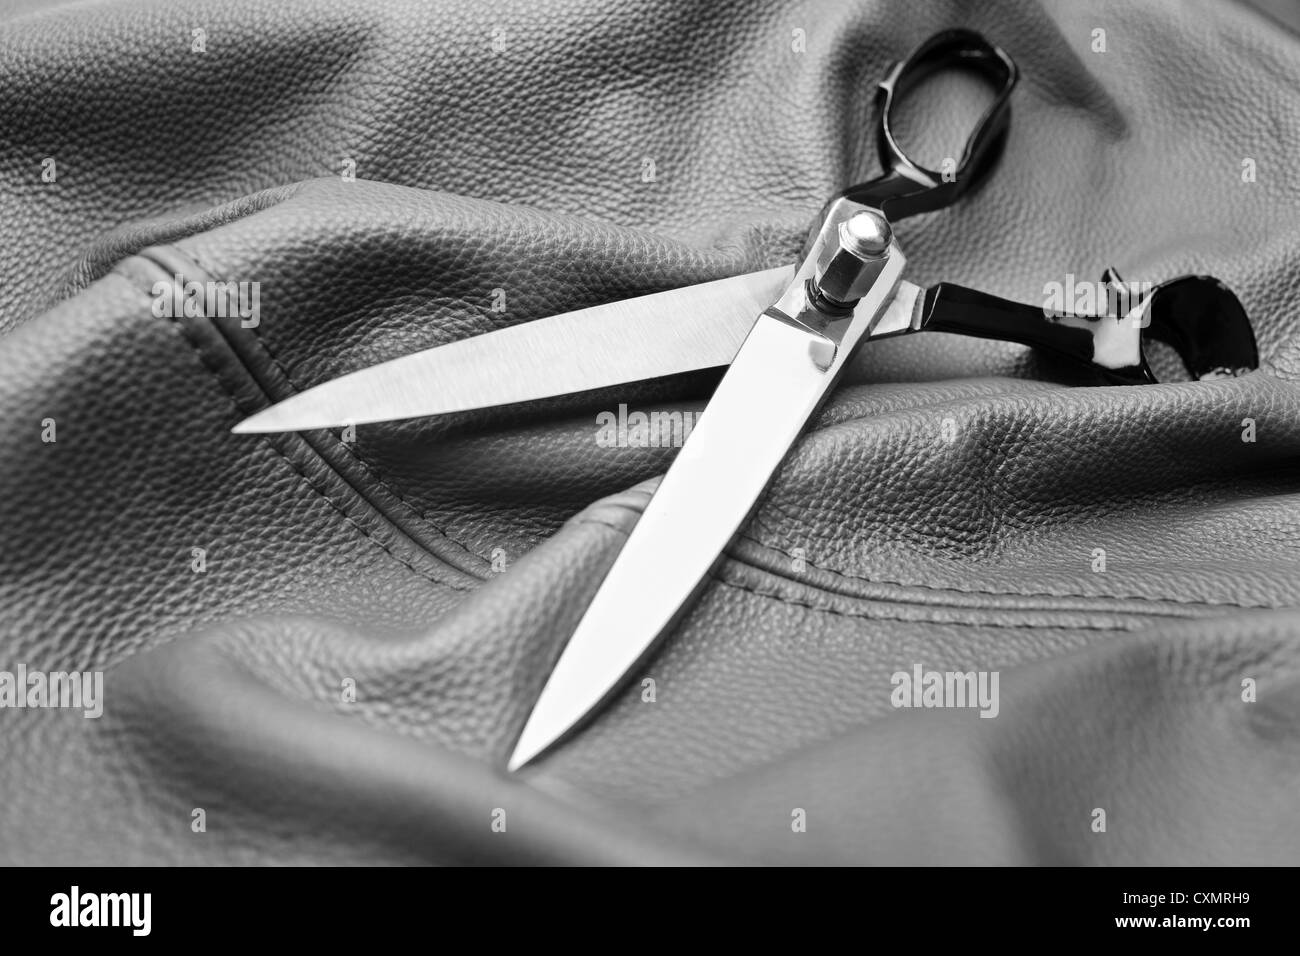 A scissors on a black leather background Stock Photo